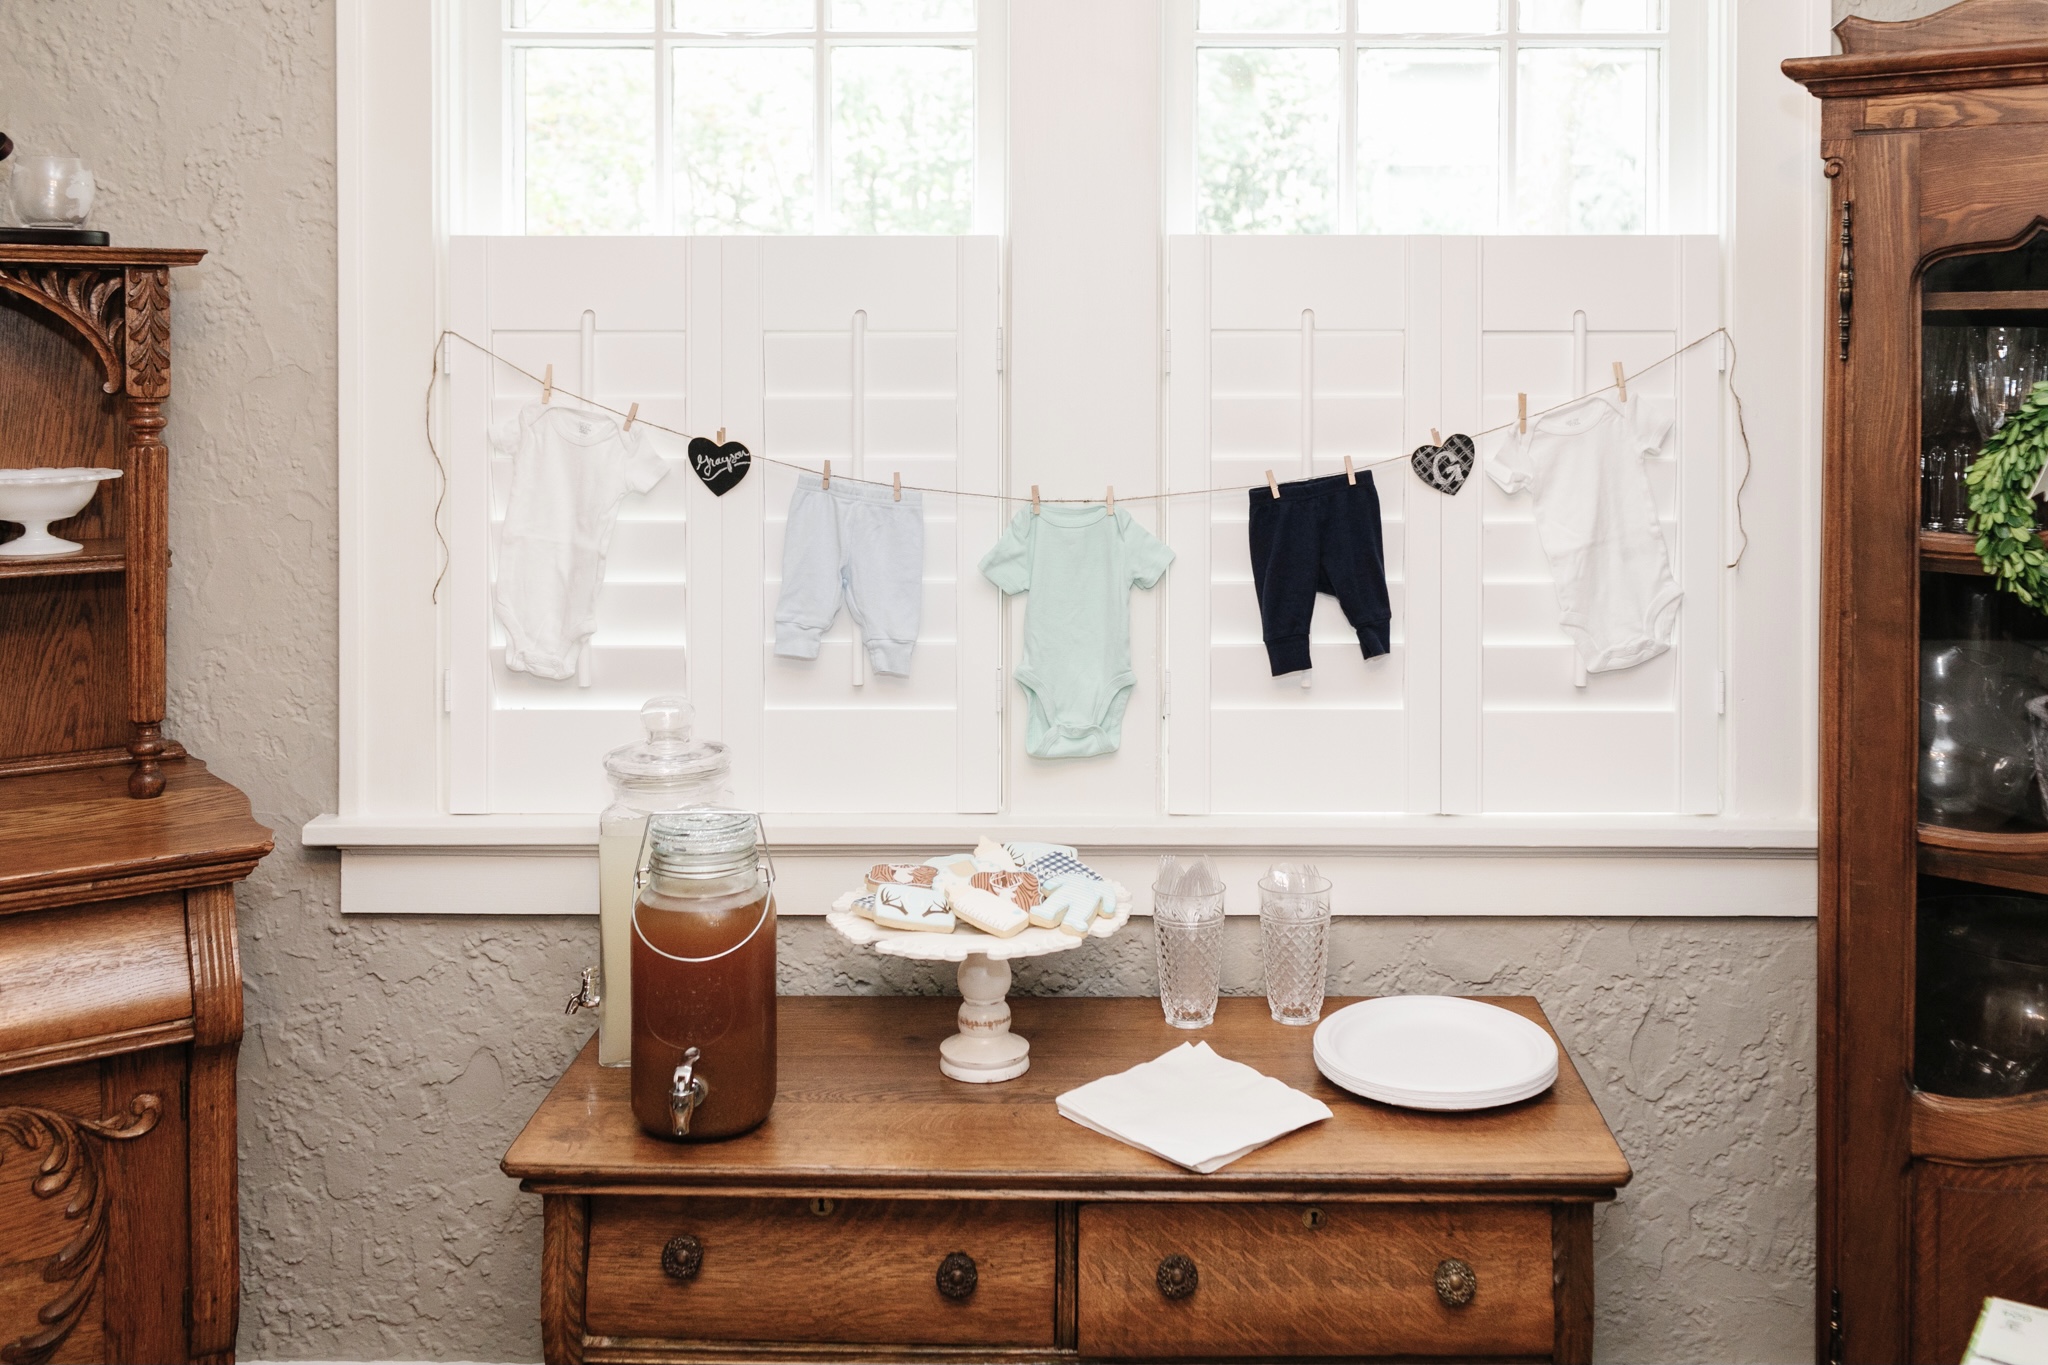 Rustic Baby Shower theme by top Memphis lifestyle mommy blogger, Walking in Memphis in High Heels.